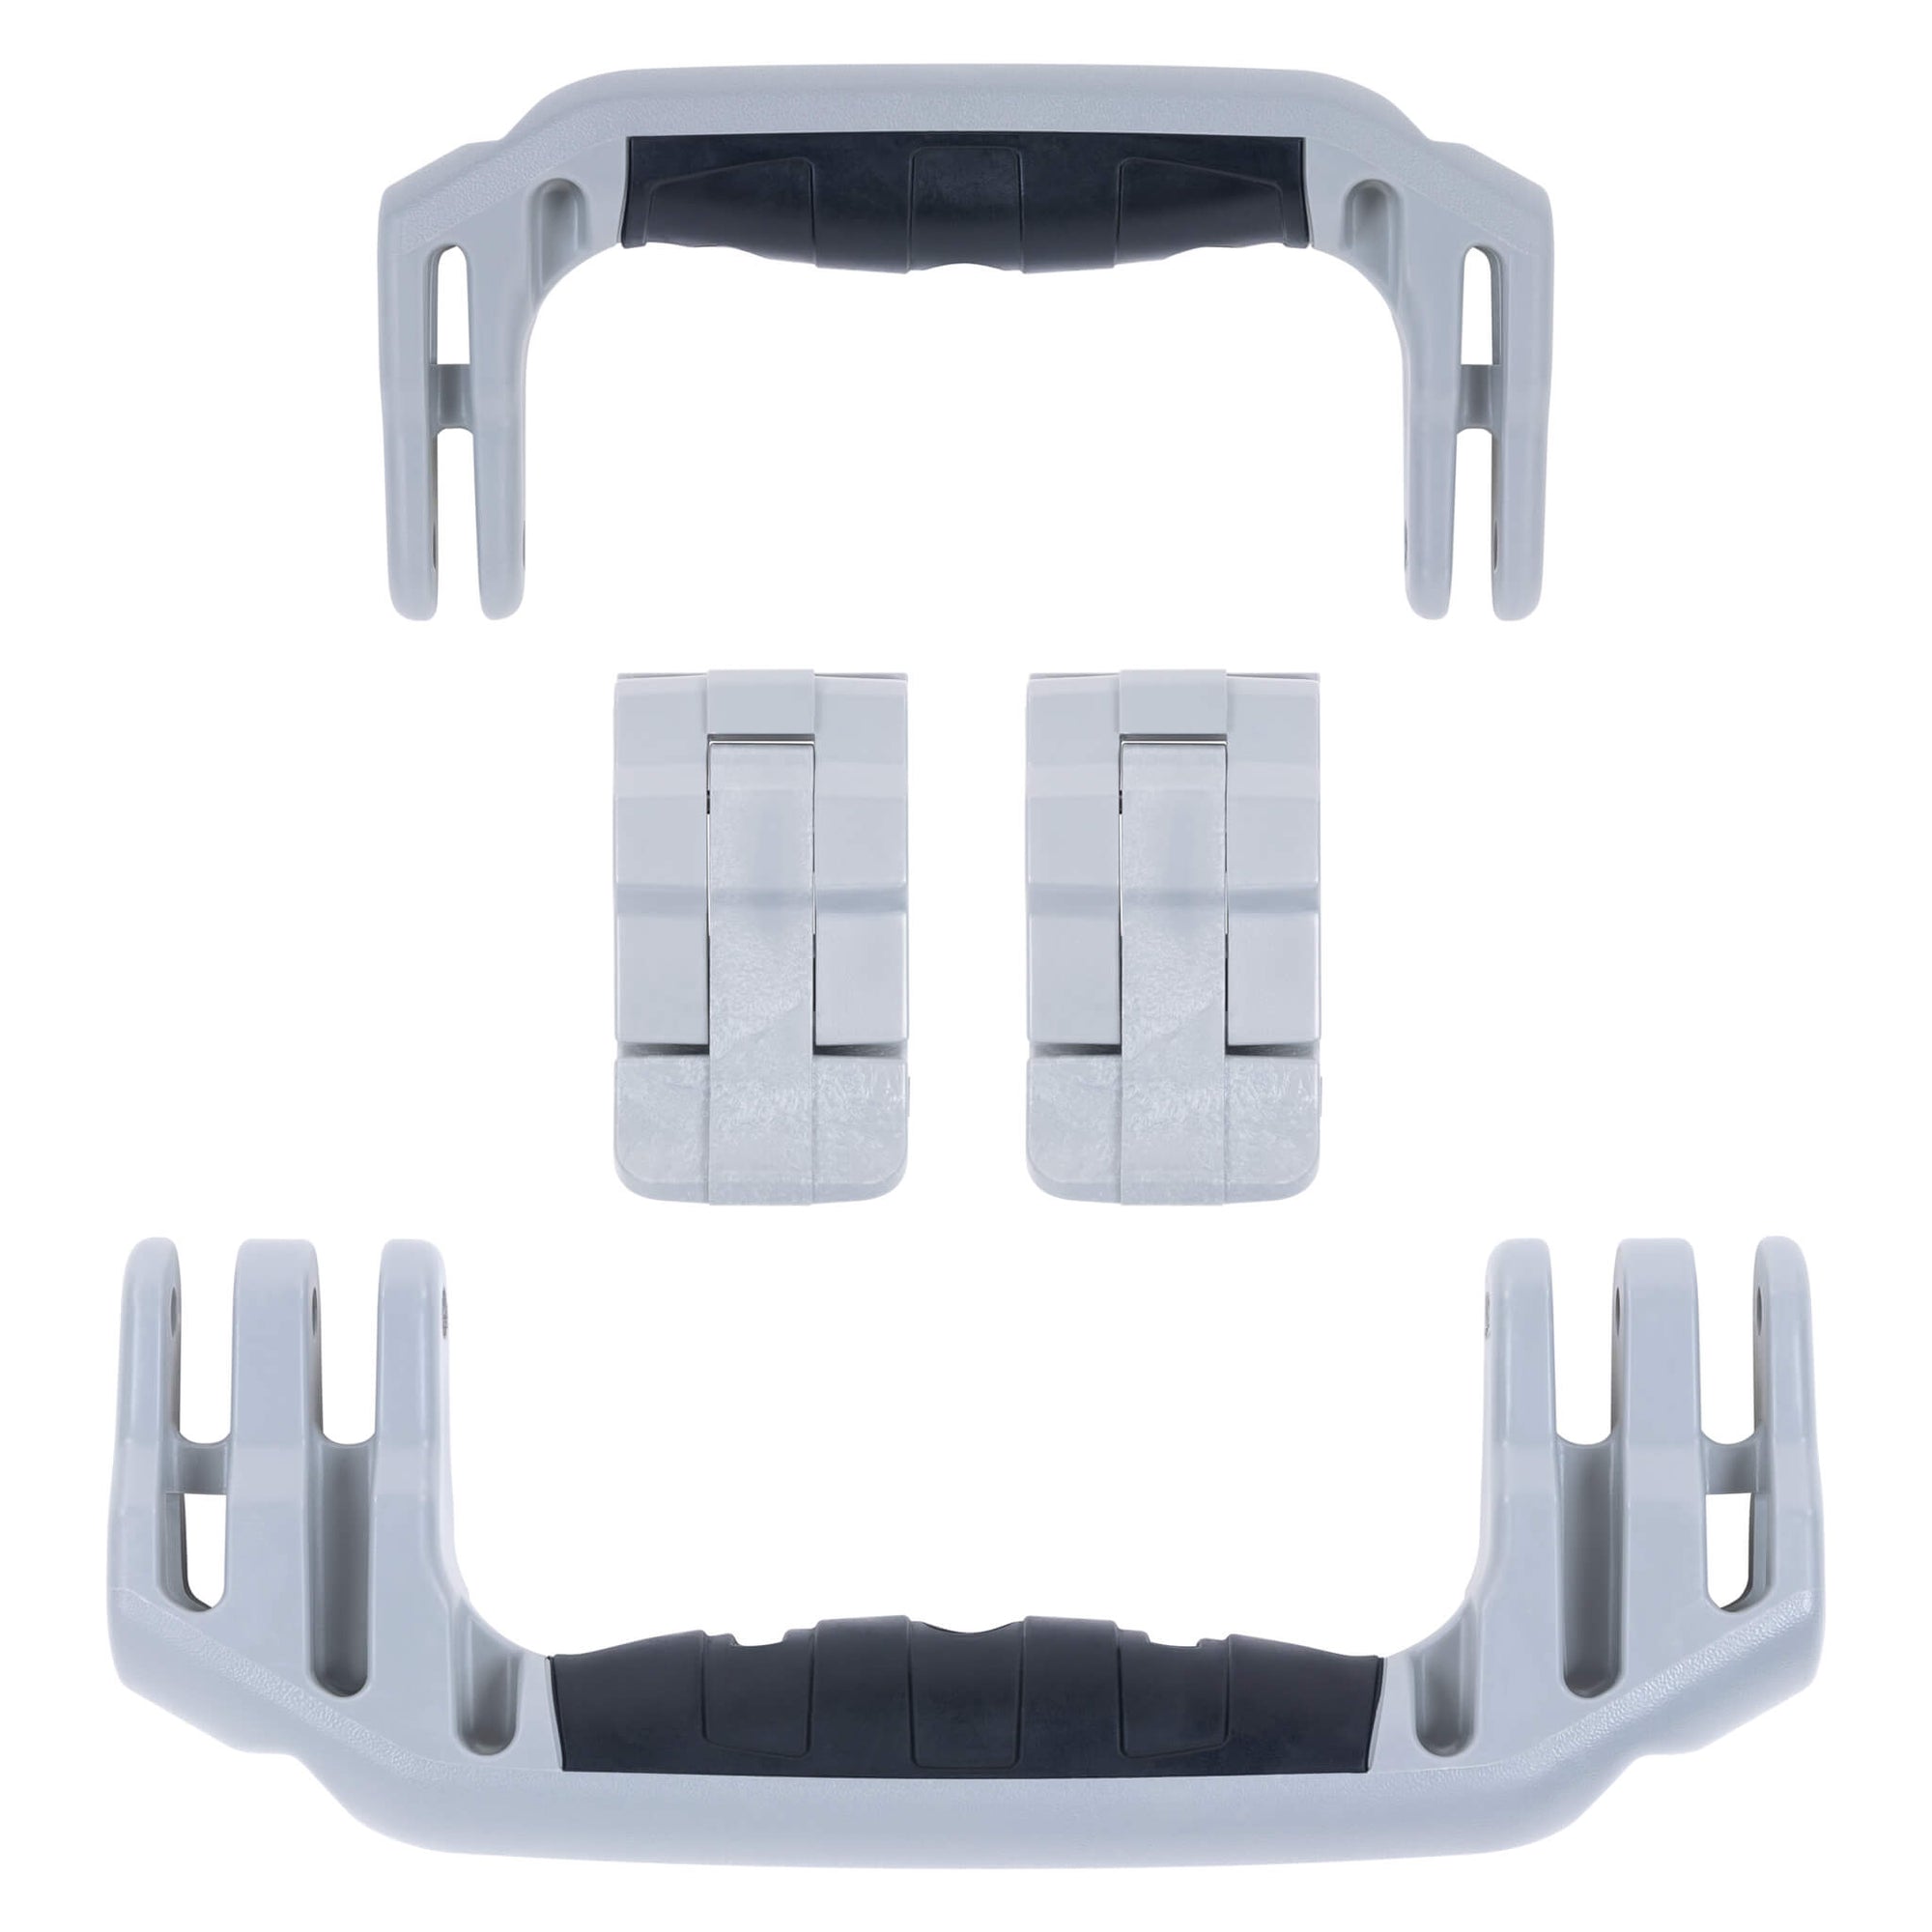 Pelican 1560 Replacement Handles & Latches, Silver (Set of 2 Handles, 2 Latches) ColorCase 